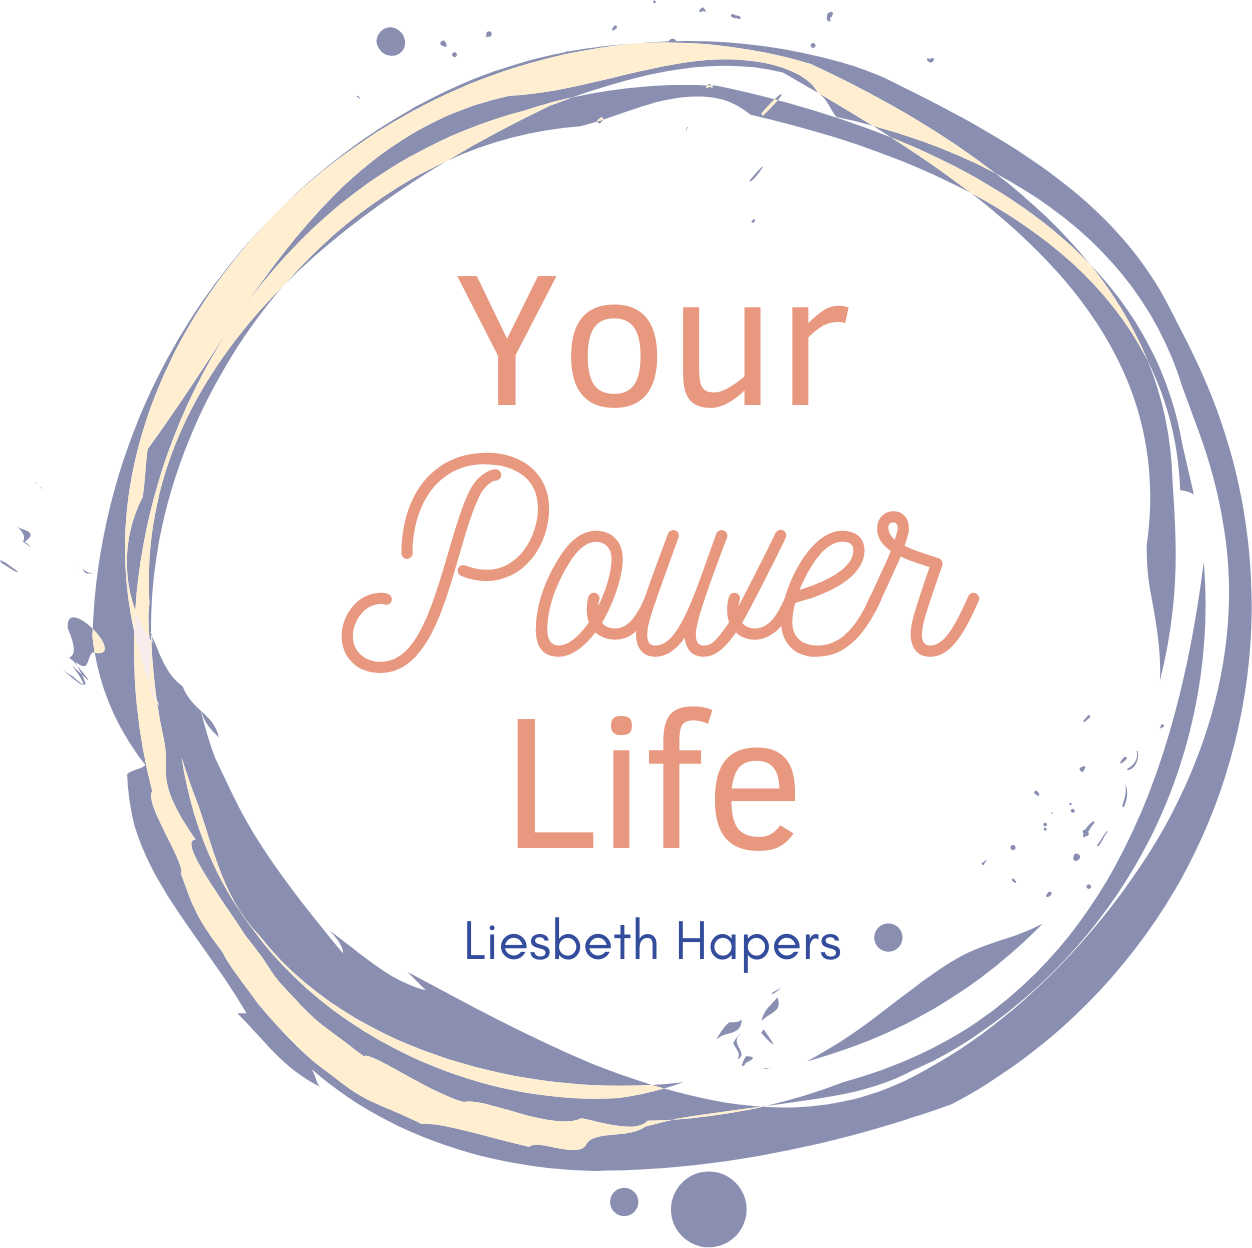 Your Power Life